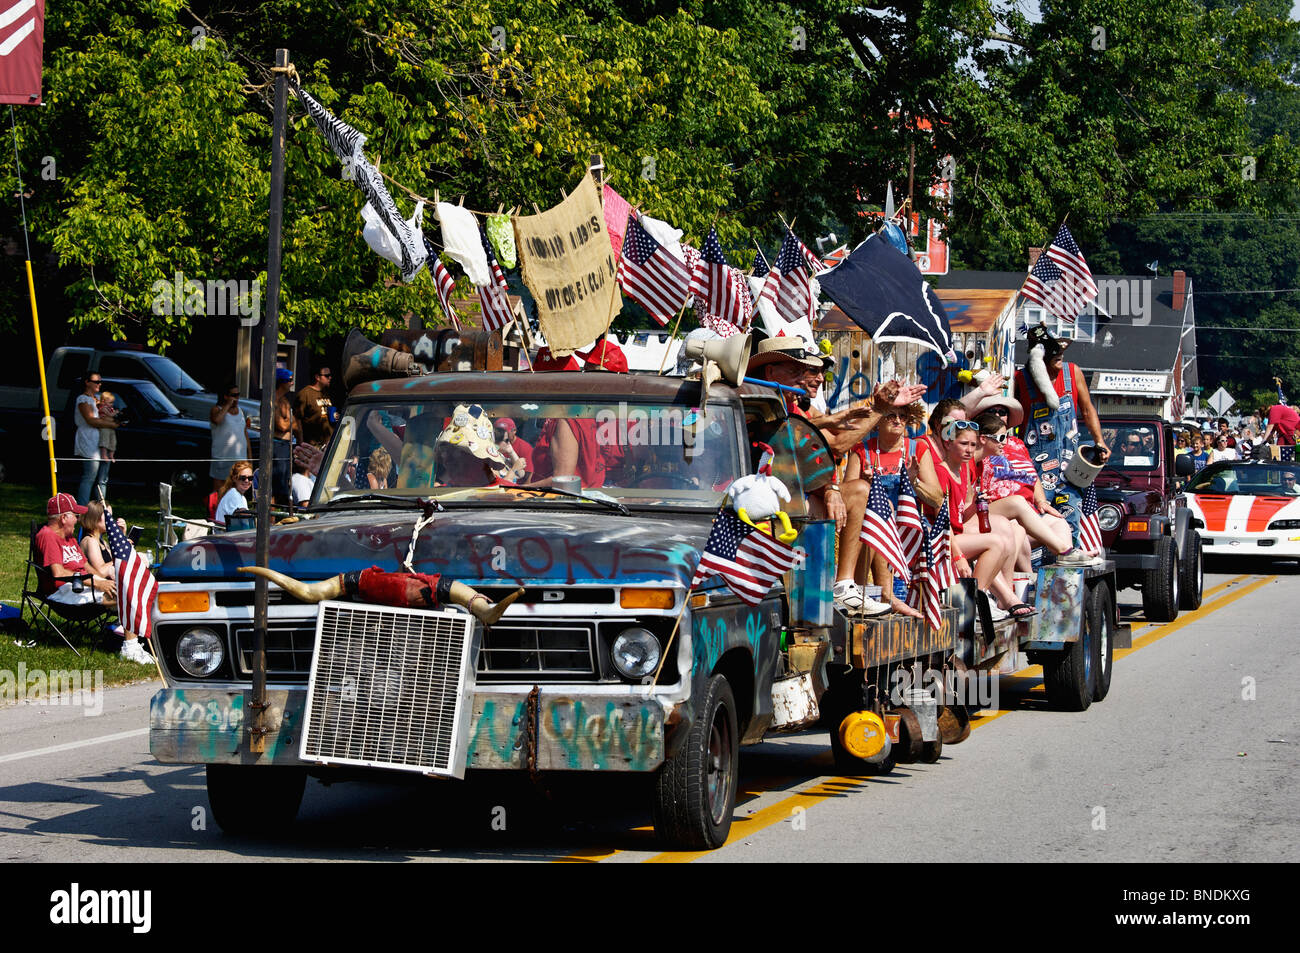 hillbilly-float-in-oldest-continuous-independence-day-parade-in-america-BNDKXG.jpg